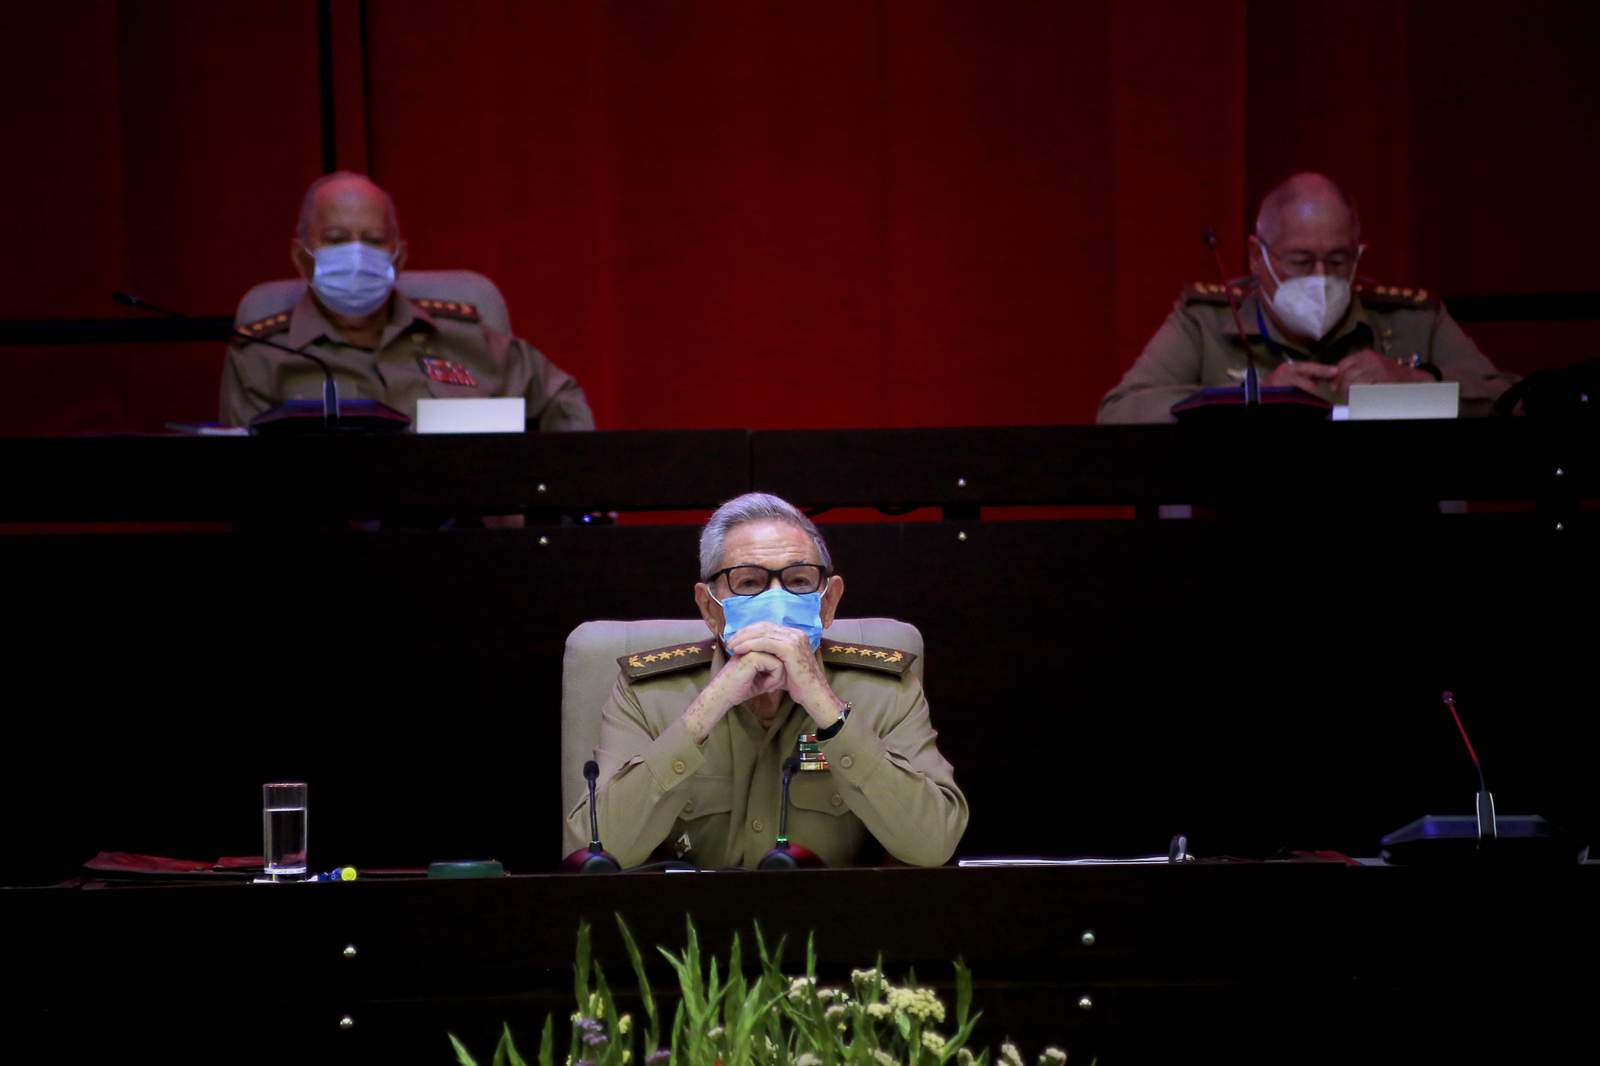 Era ends as Raul Castro steps down as Communist Party chief